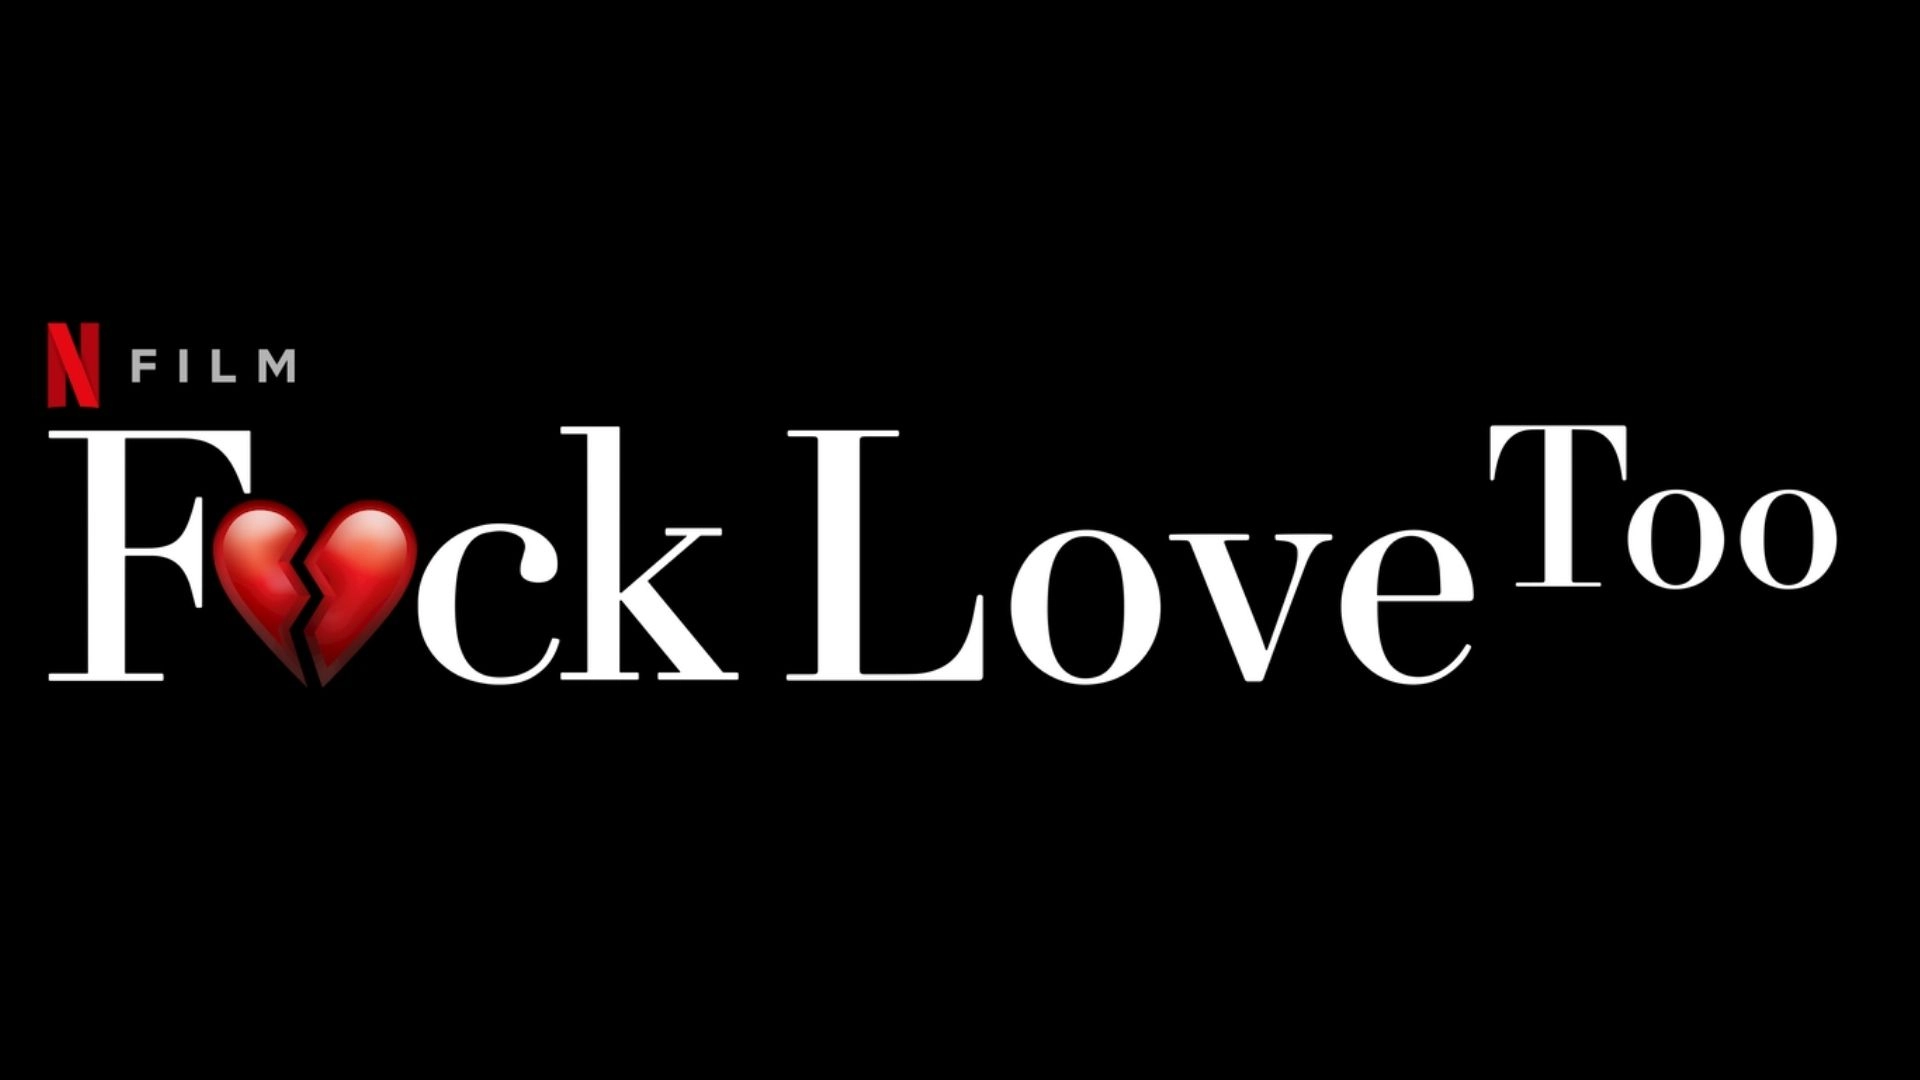 F*ck Love Too Parents Guide. F*ck Love Too Age Rating. 2022 Netflix Upcoming film F*ck Love Too release date, cast, production, overview, trailer.